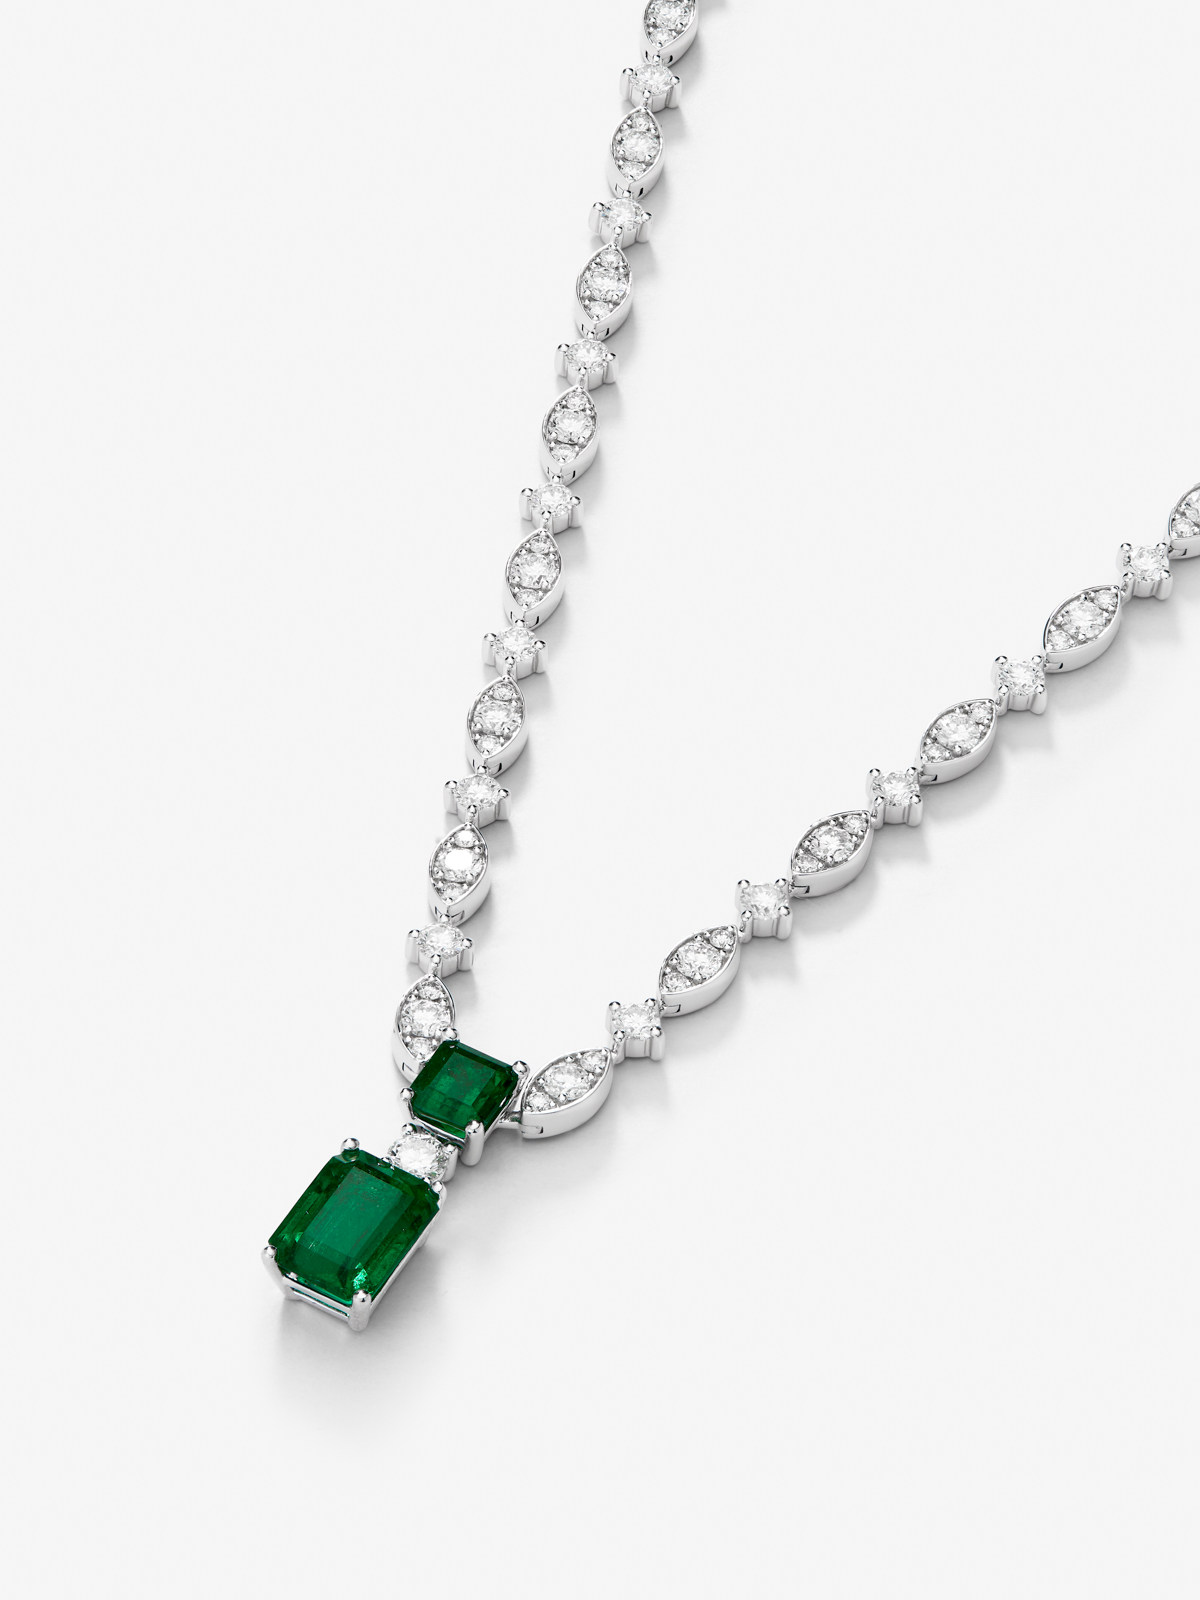 18K white gold necklace with green emeralds in octagonal size of 3.59 cts and white diamonds in 7.24 cts bright size